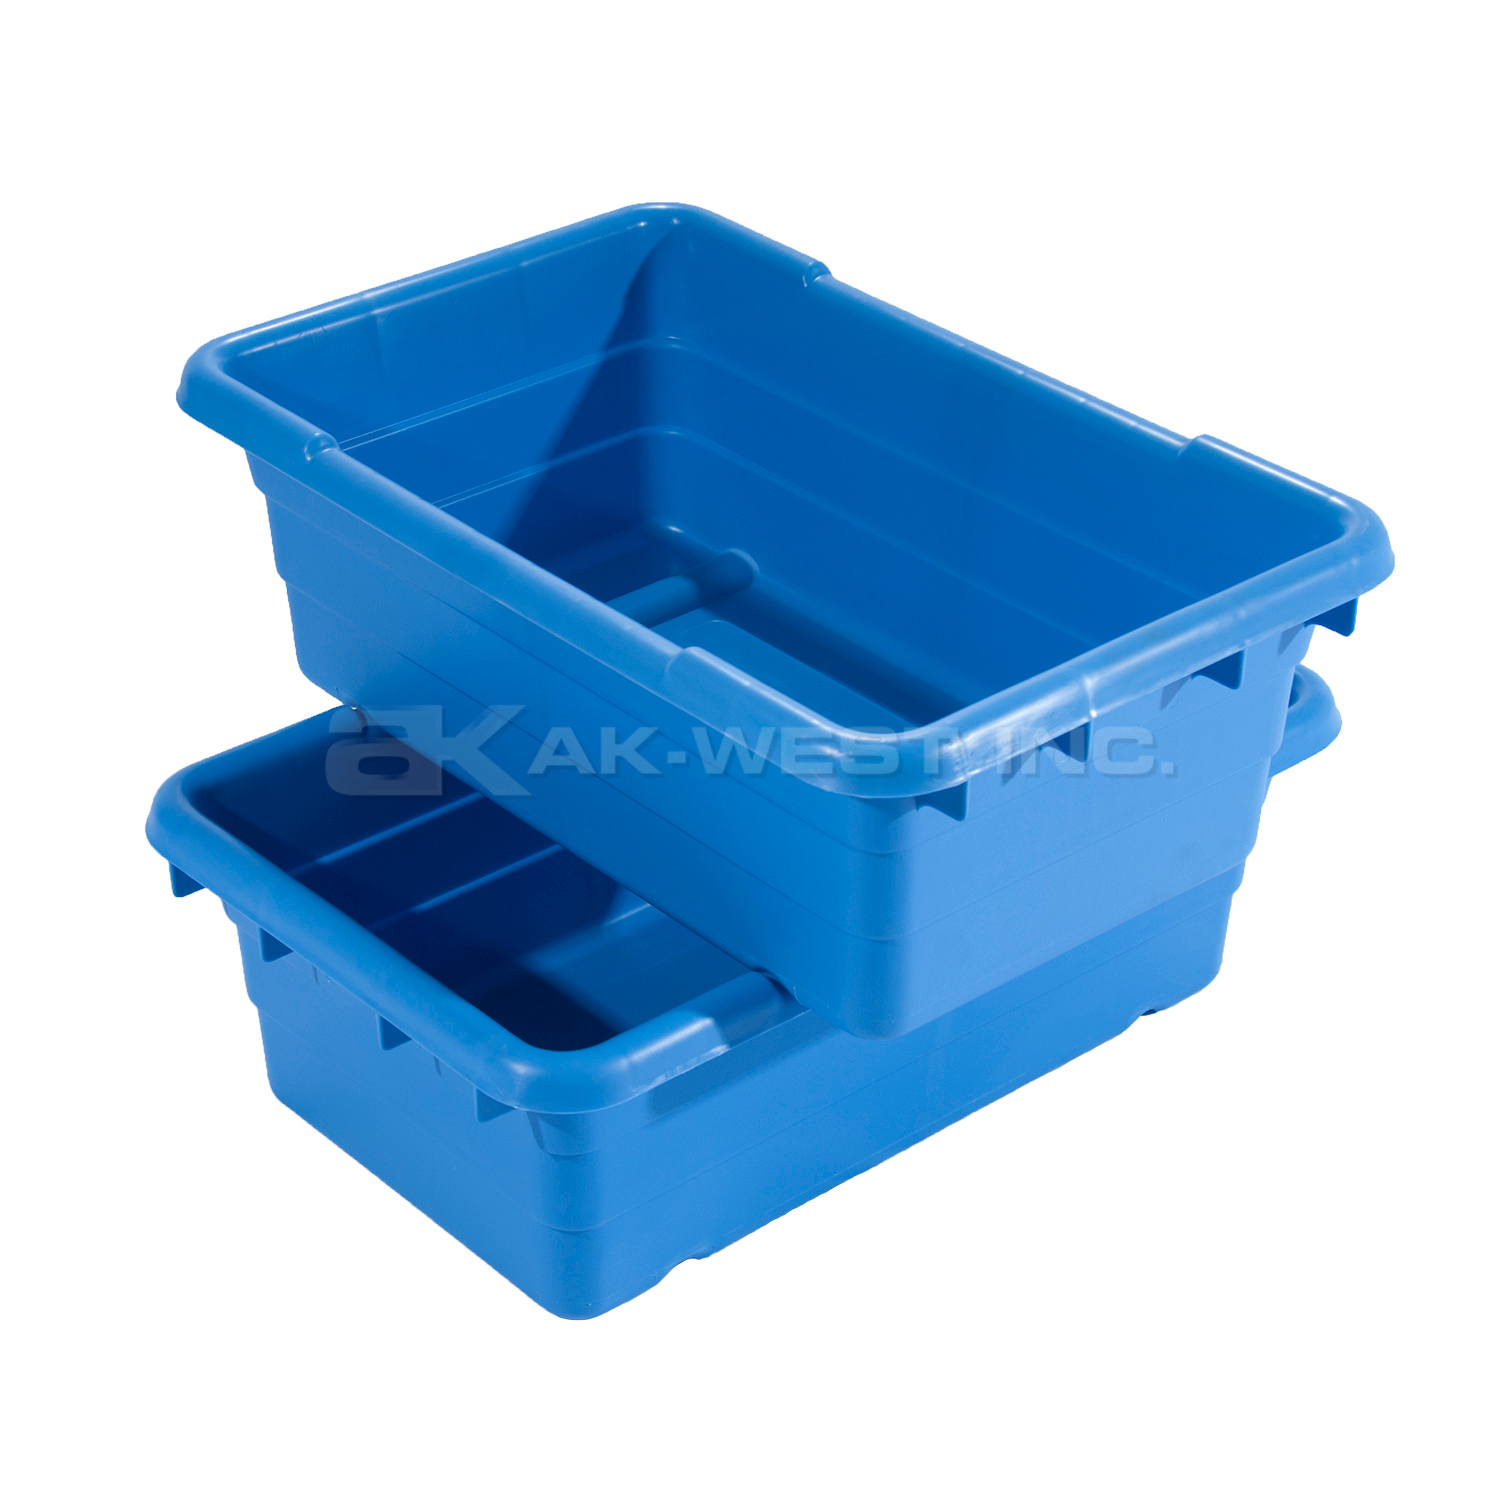 Blue, 25" x 16" x 9", Jumbo Lug Cross Stack and Nest Container, Polypropylene Version